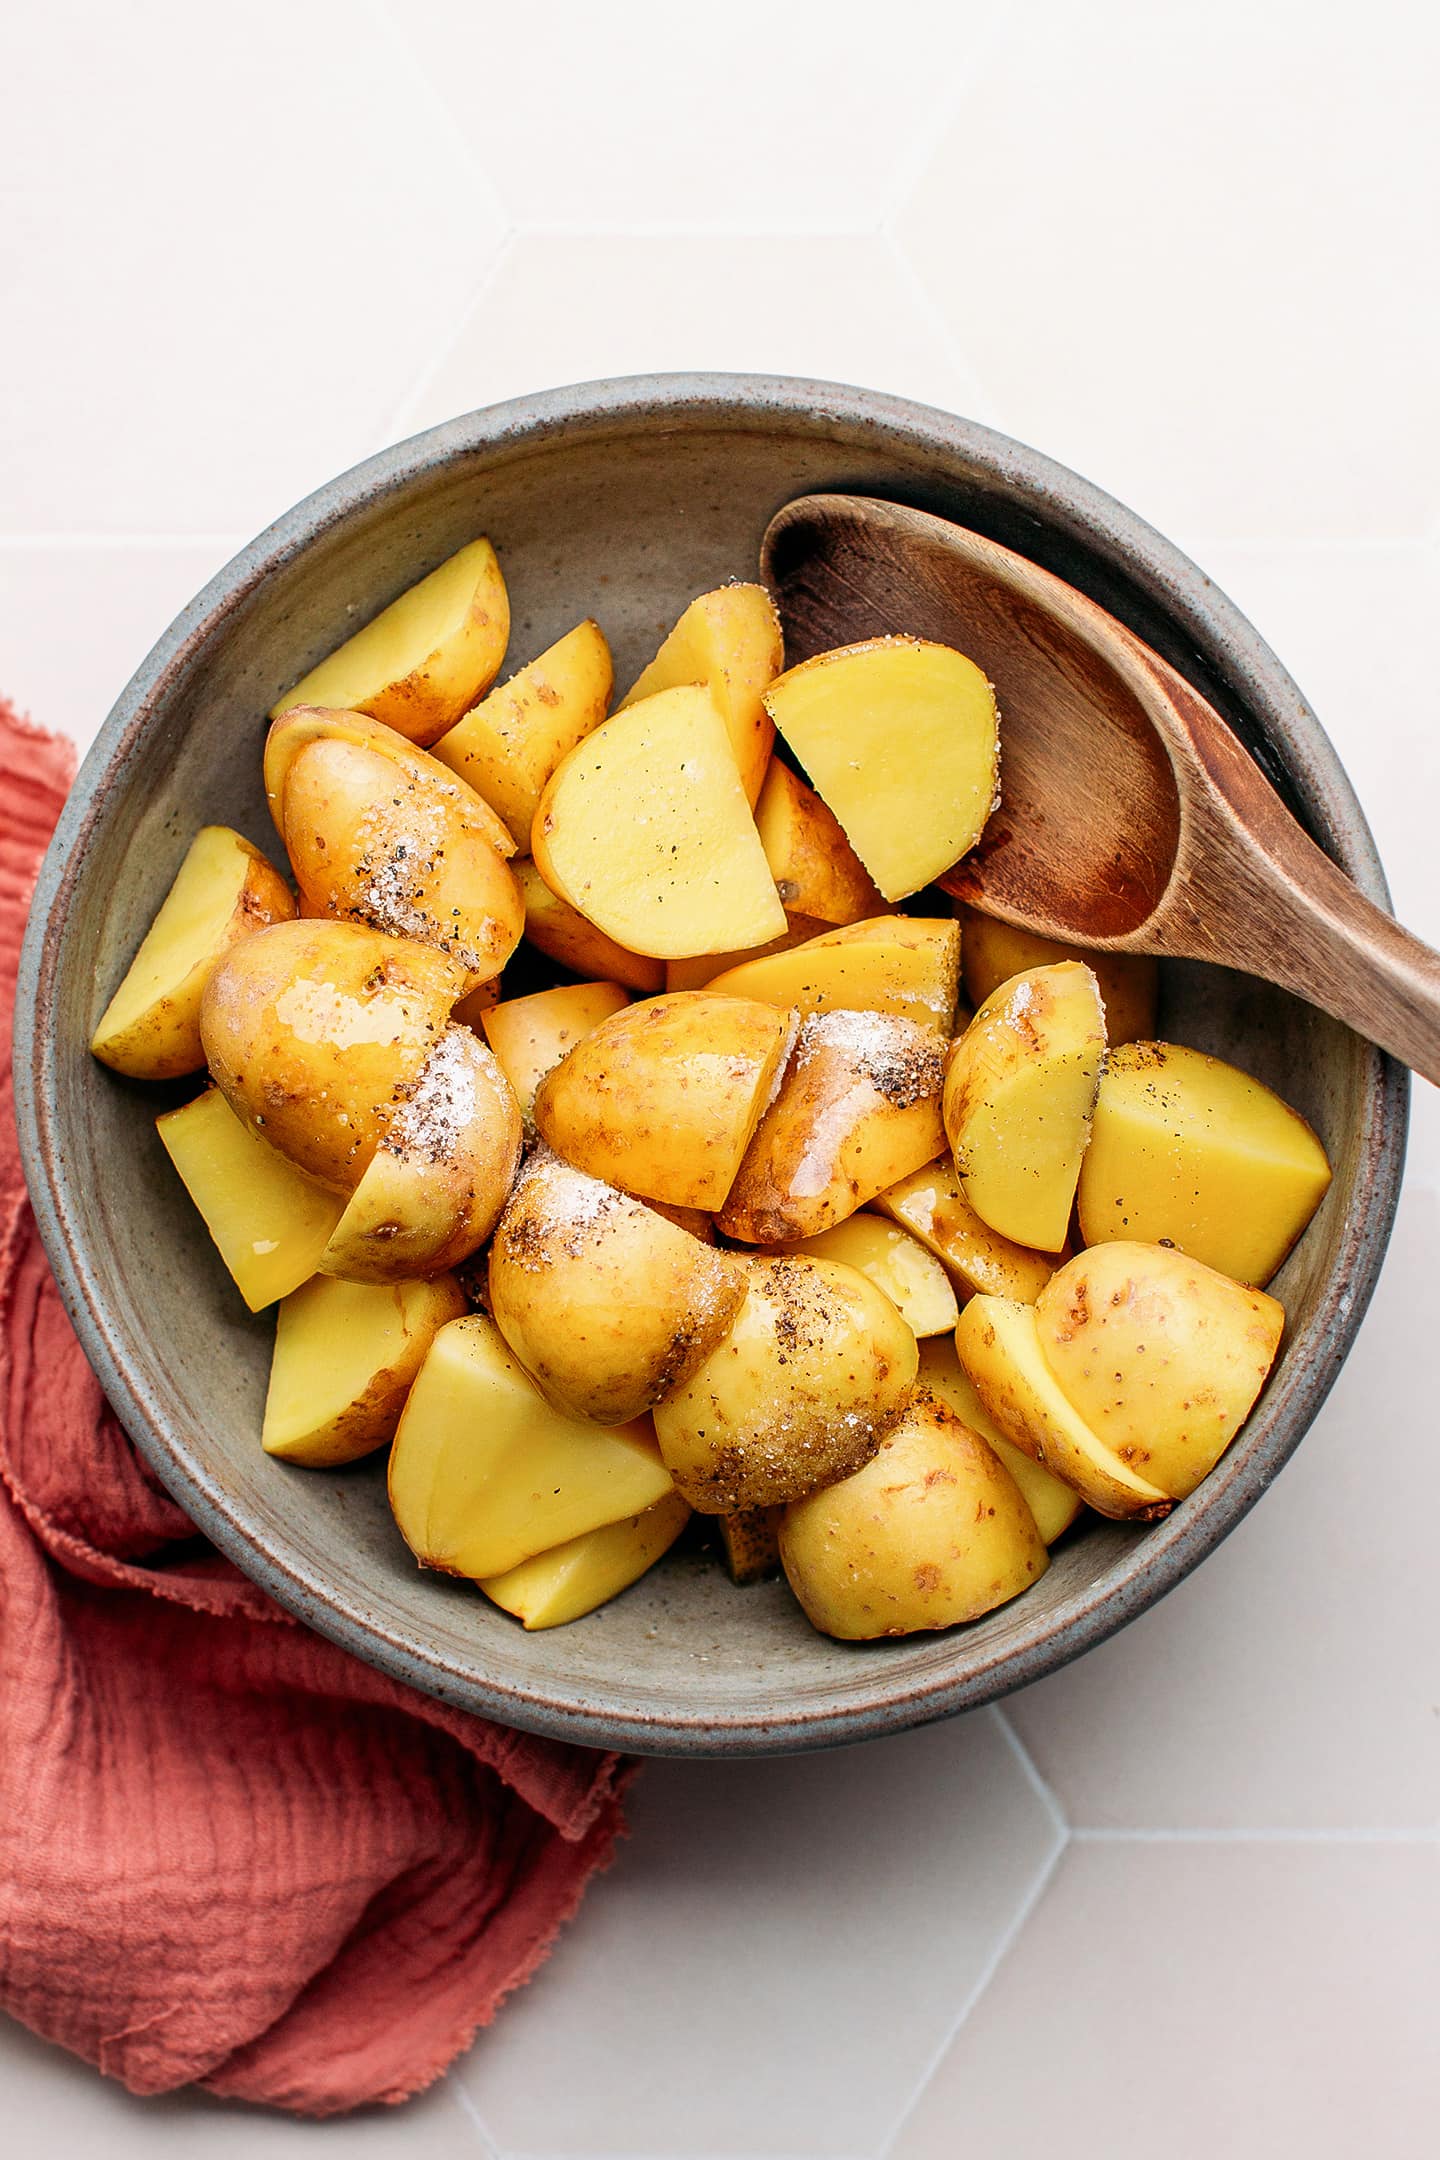 Quartered potatoes tossed with salt and pepper in a bowl.